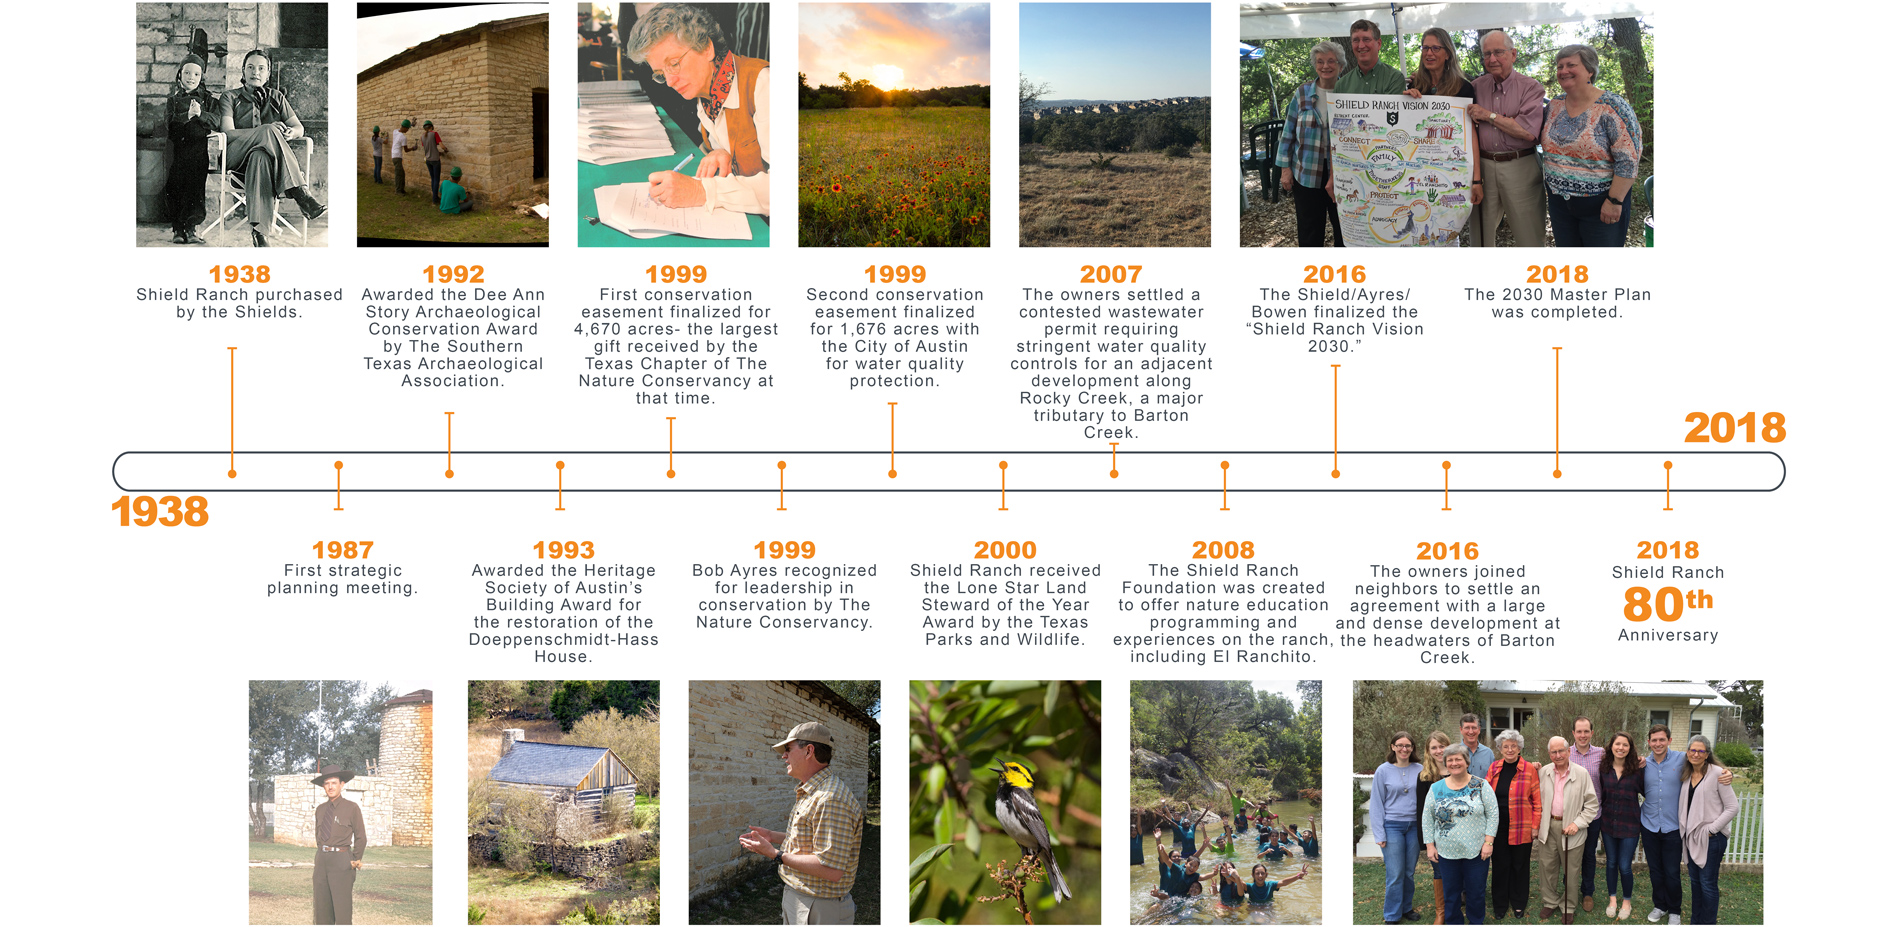 The owner’s longstanding commitment to stewardship, advocacy, and education spans four generations. An inclusive master planning process enabled the f…